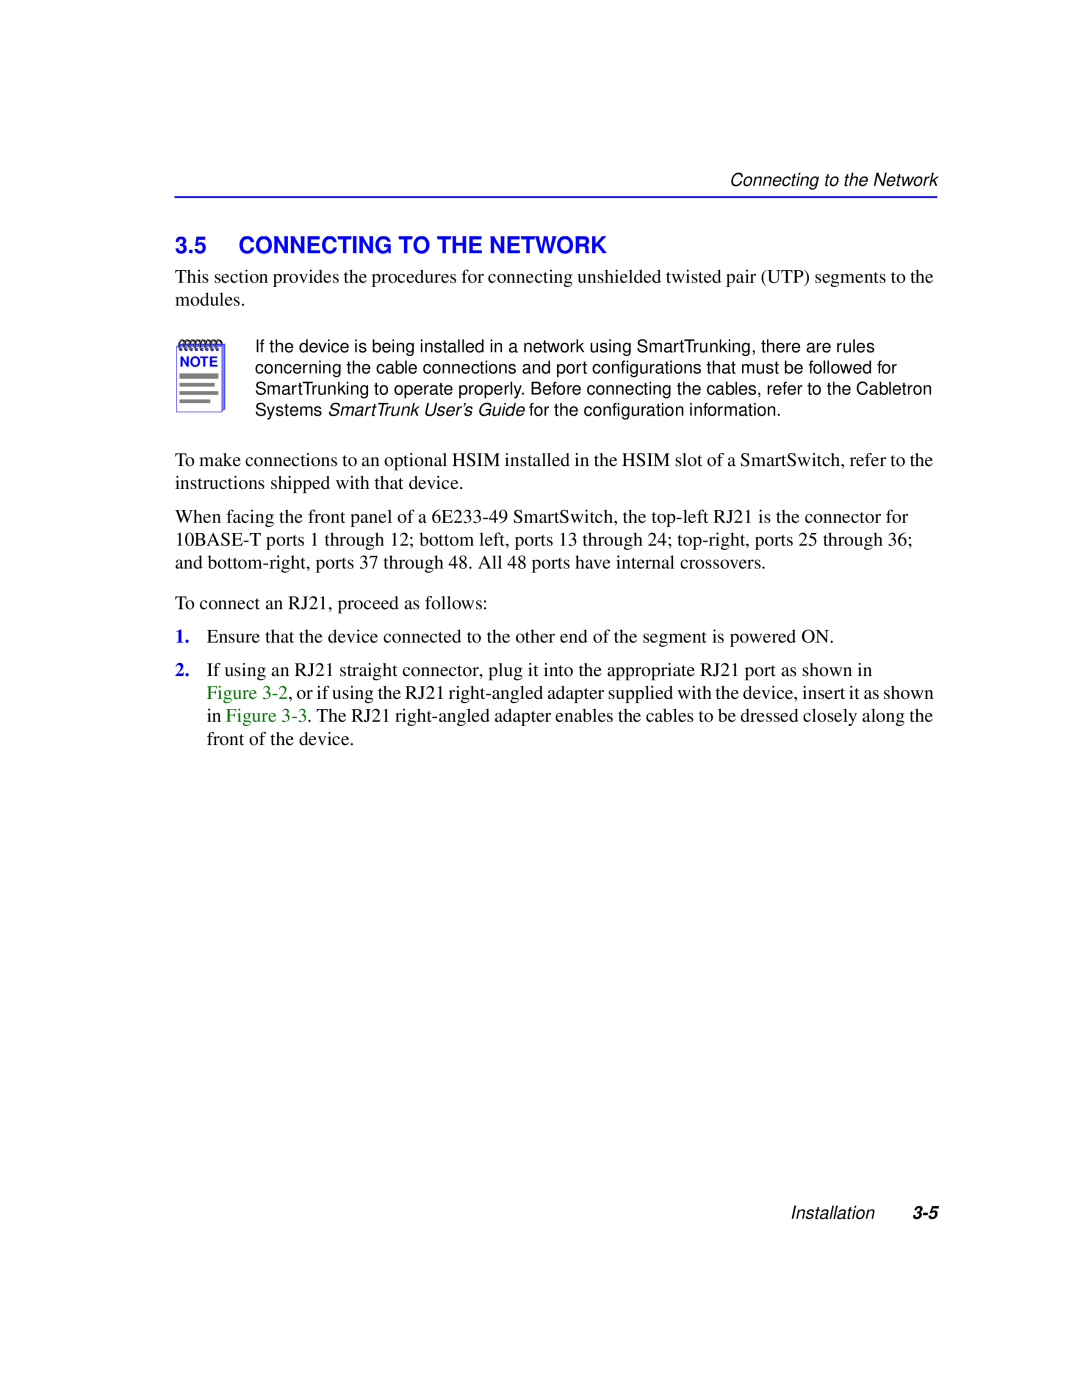 Cabletron Systems 6000 manual Connecting To The Network 